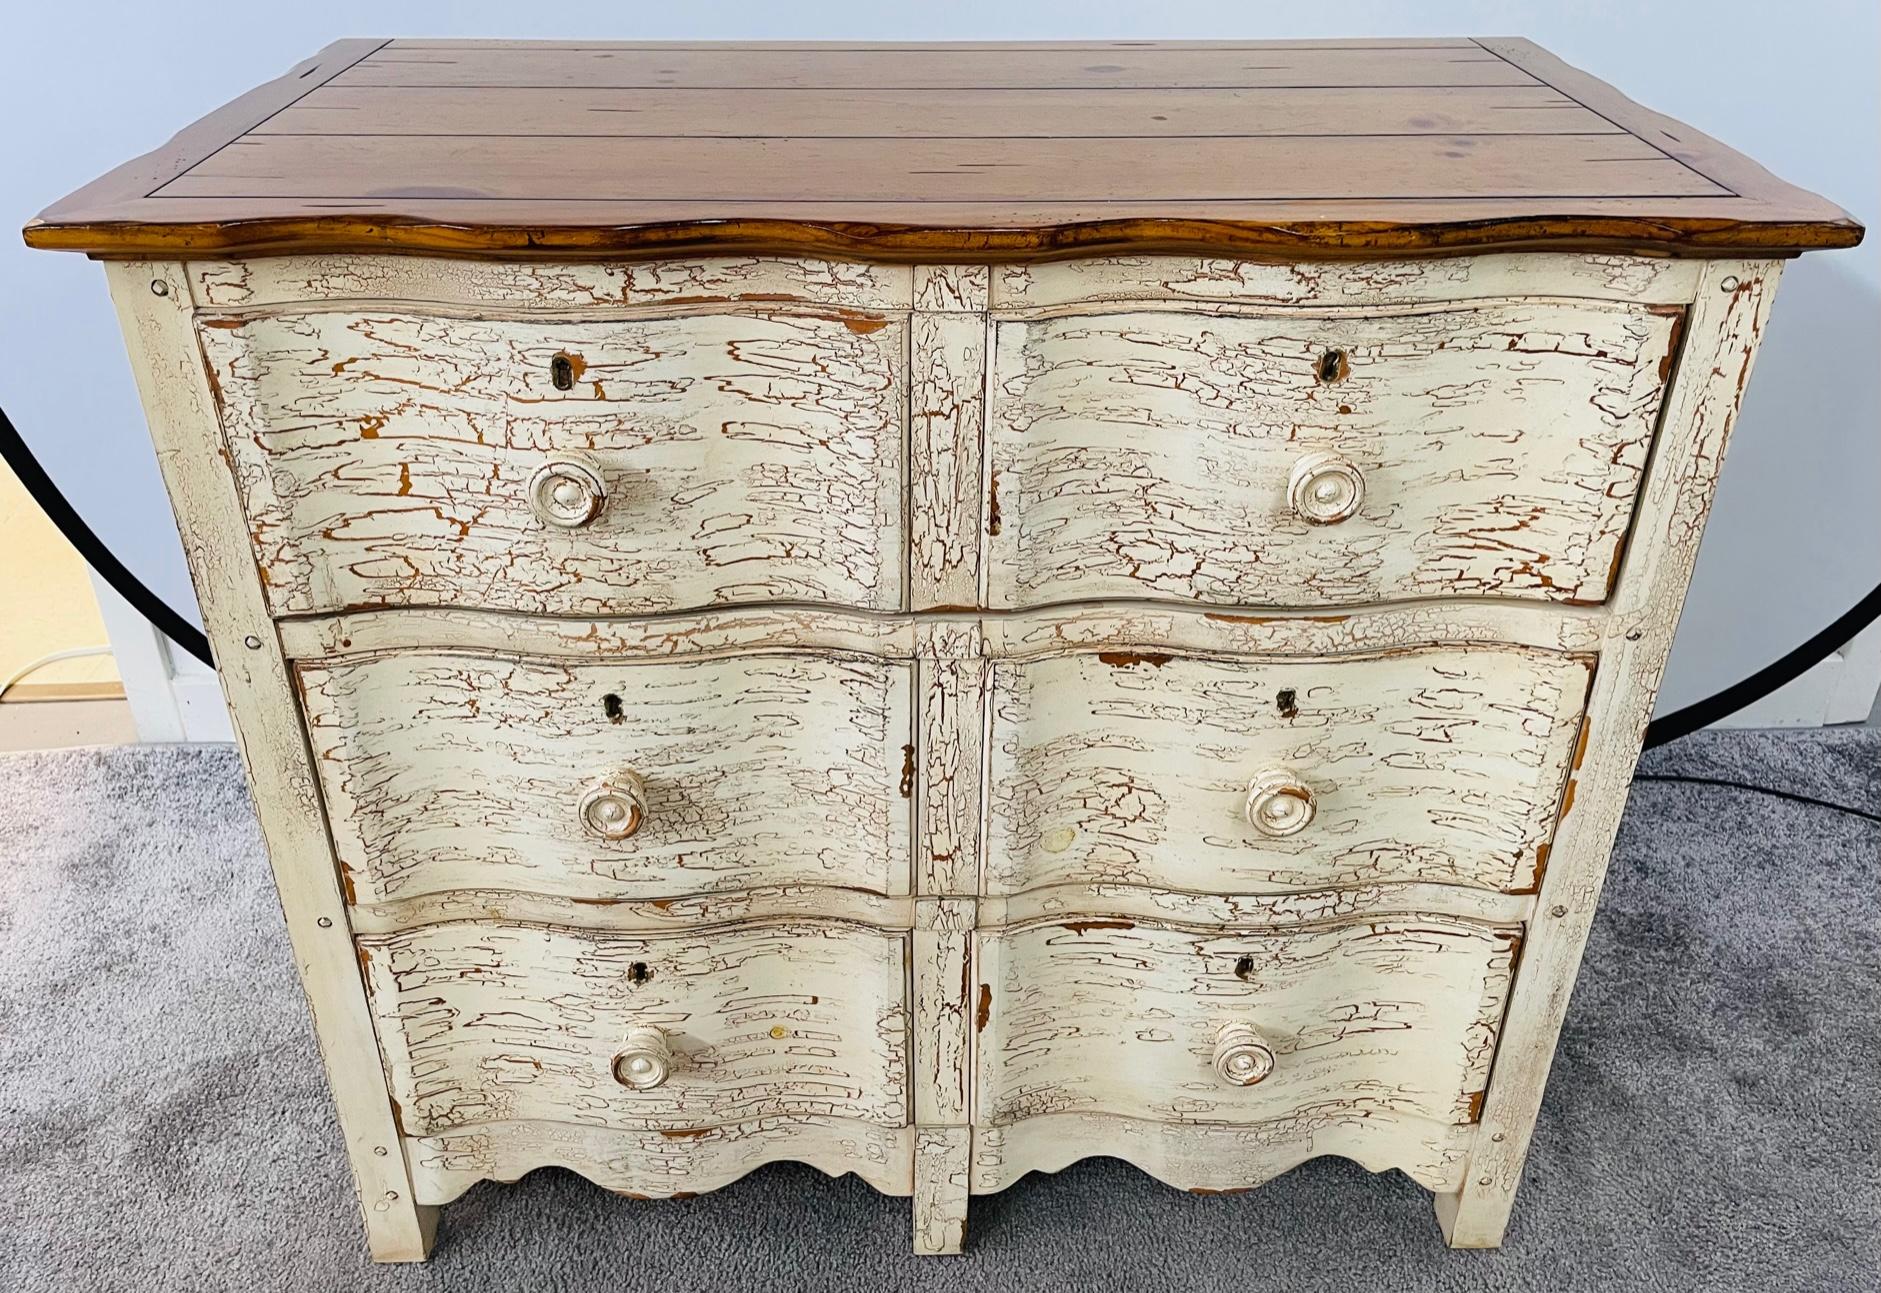 An exquisite French country style nightstand, chest or commode by Drexel Studio. The chest offers 3 drawers for storage and features a wooden pine top while the chest is finished in a distressed cream color. The chest or nightstand is finely carved